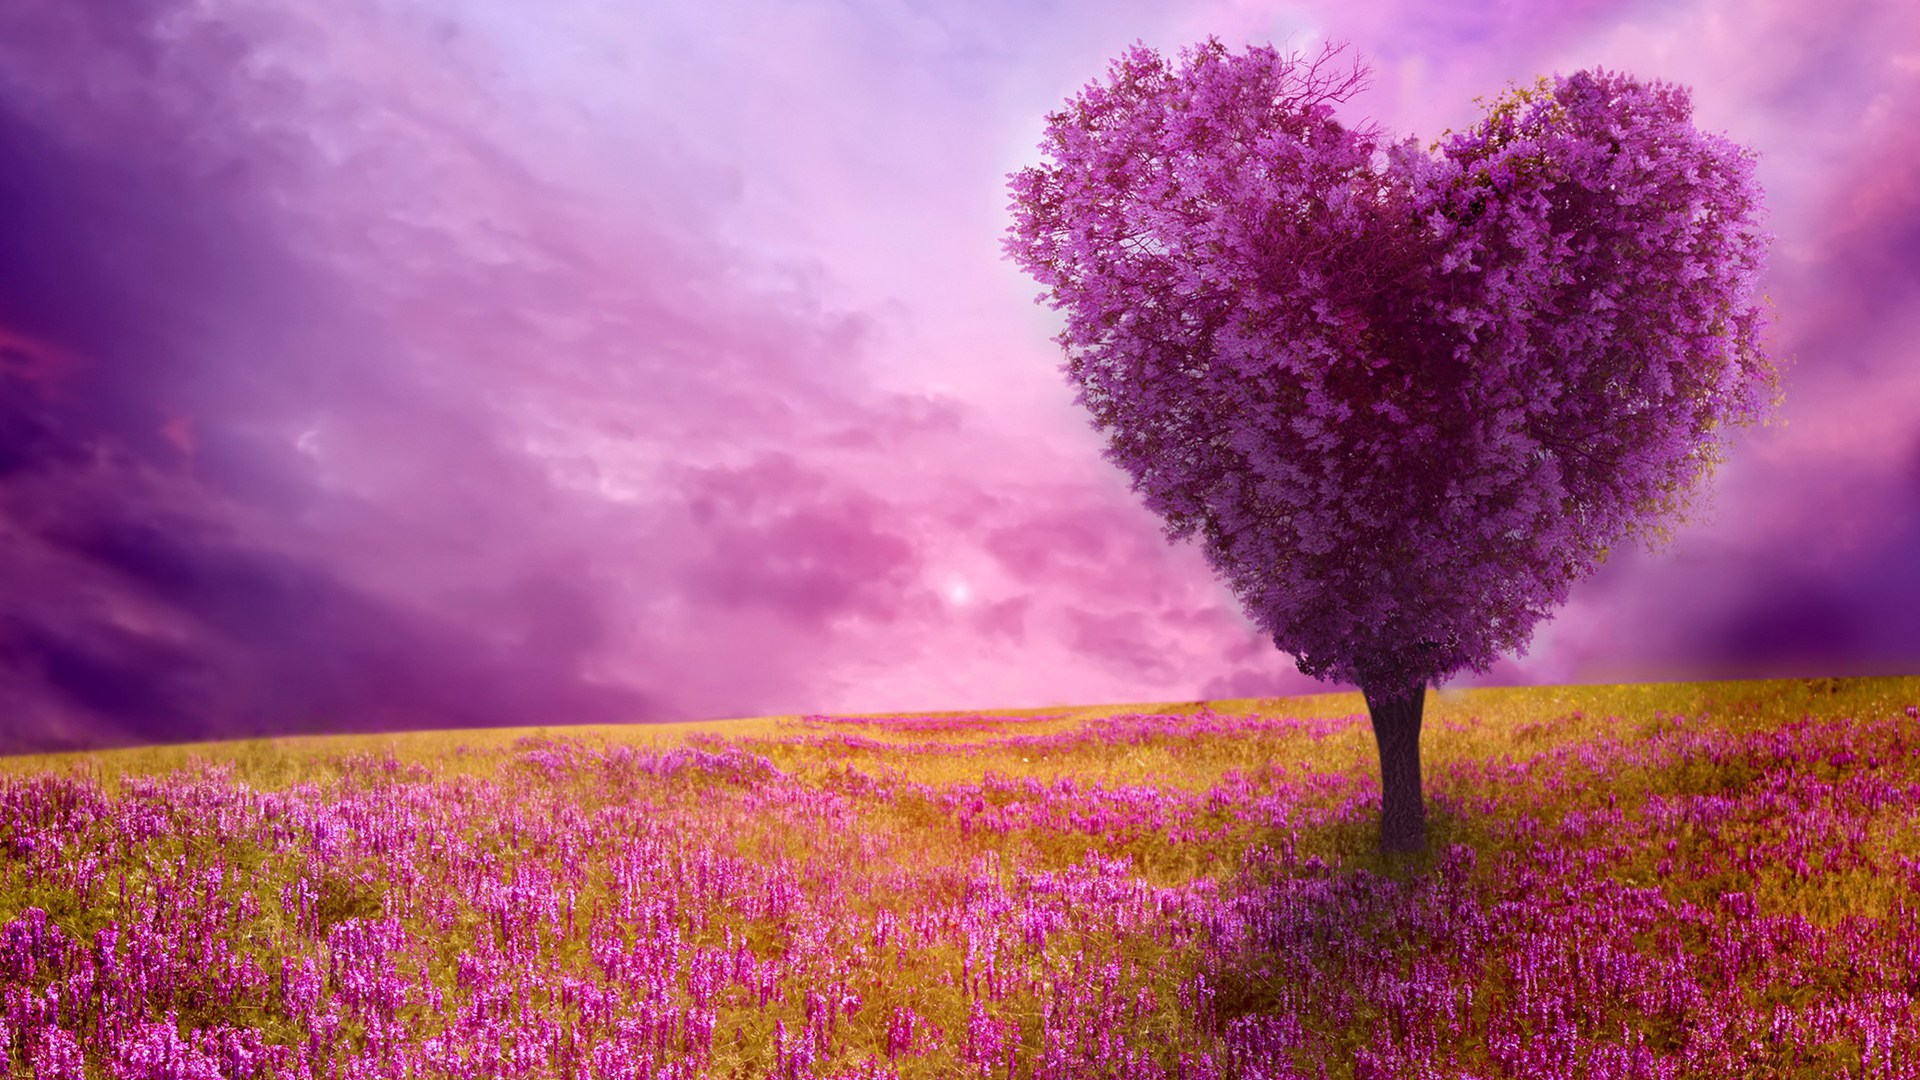 Beautiful Spring images download